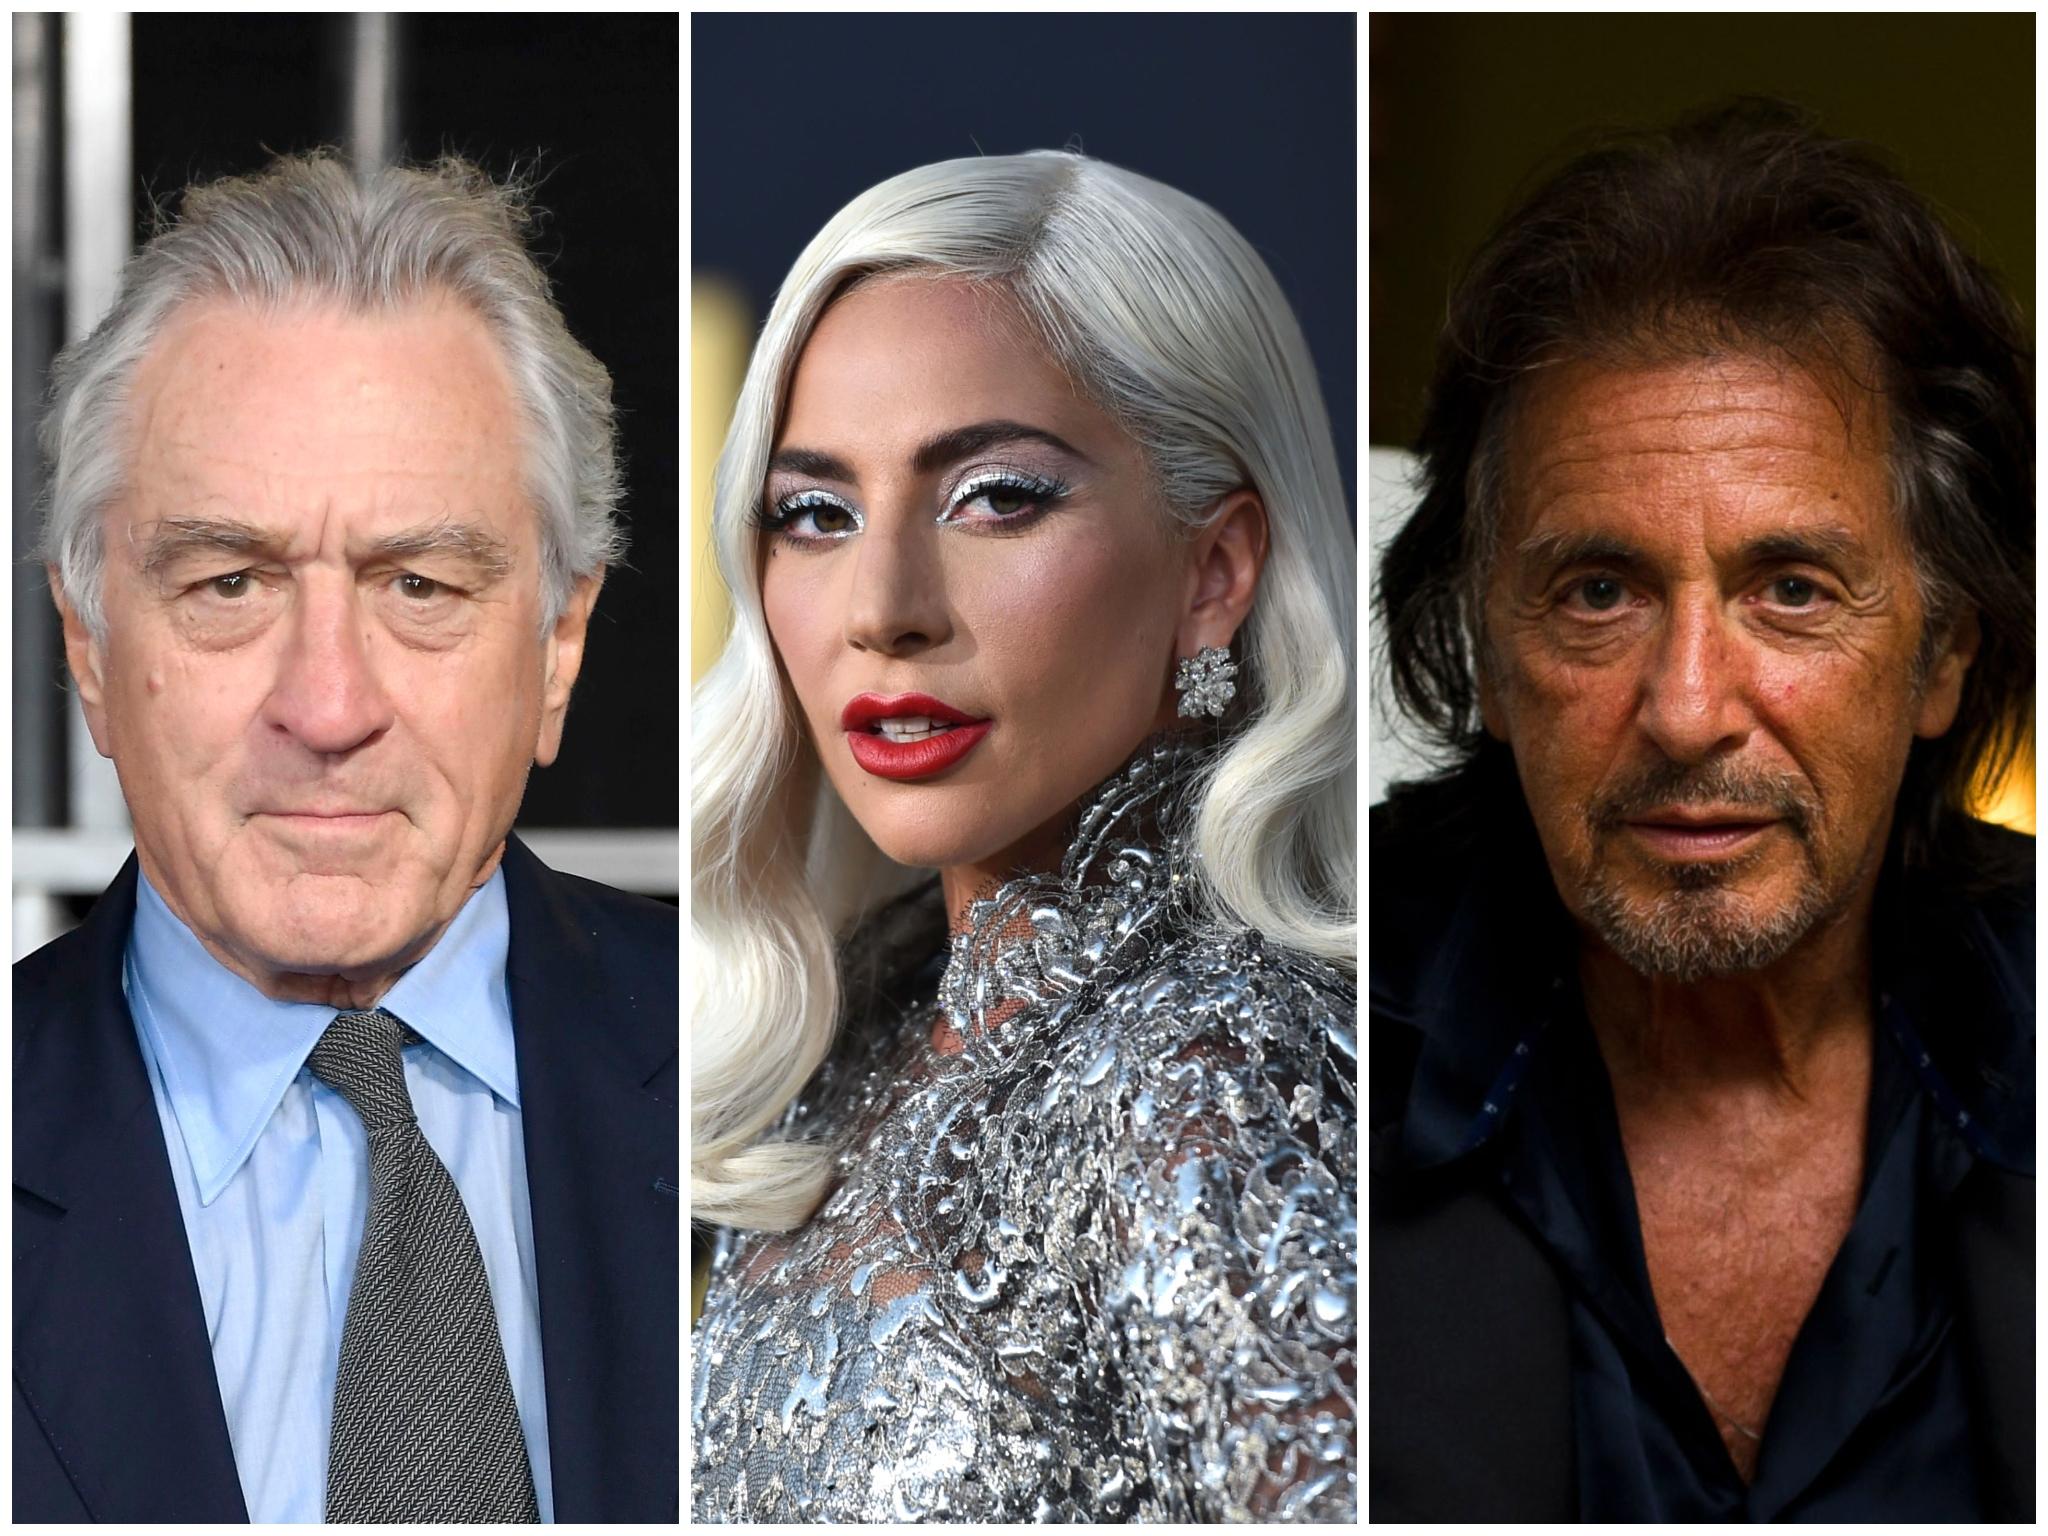 Robert De Niro and Al Pacino to star in Lady Gaga film from Ridley Scott The Independent The Independent